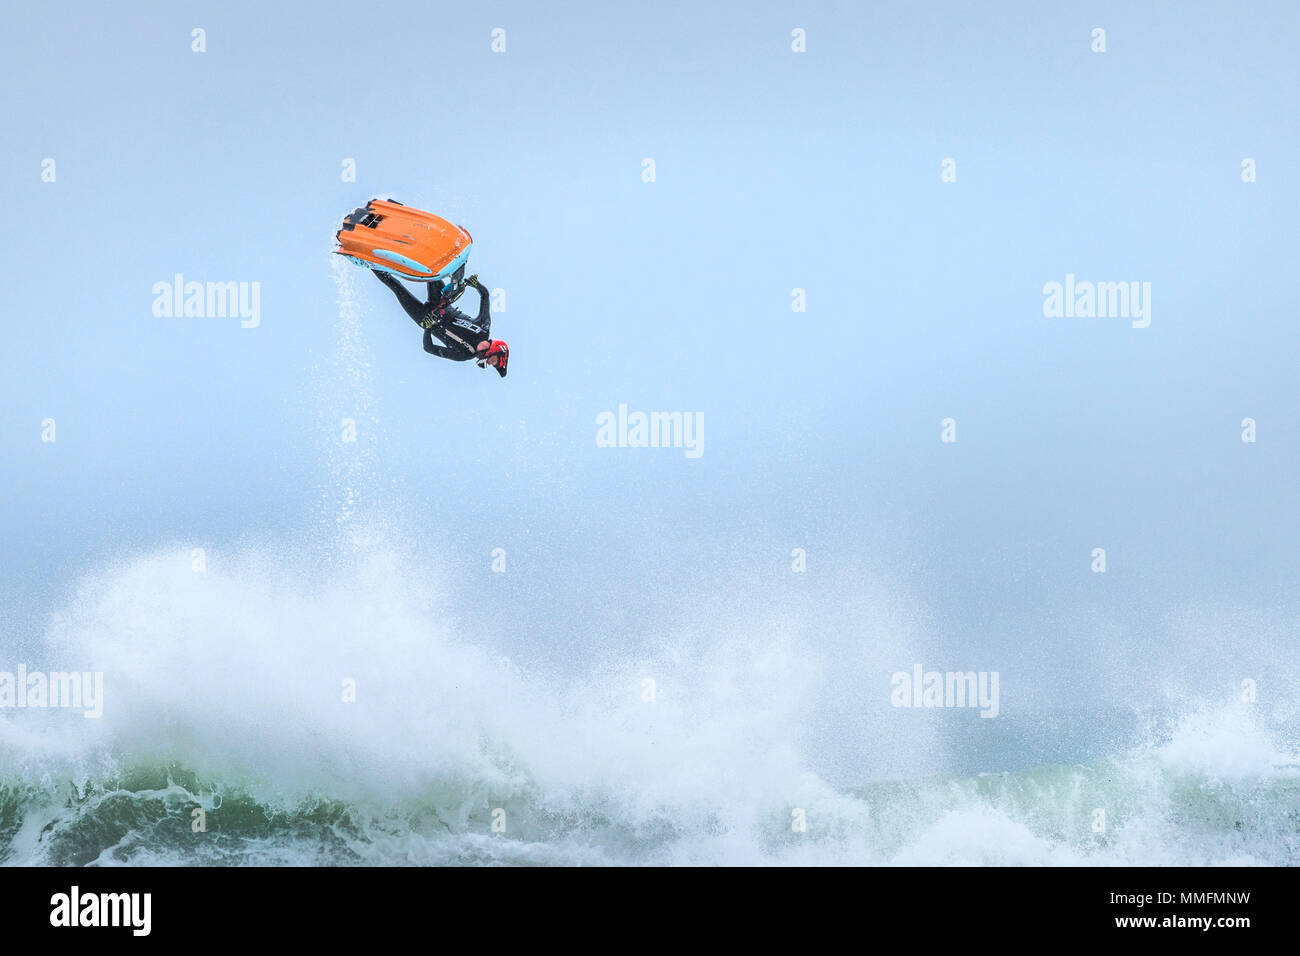 Newquay, Cornwall, UK. 11th May, 2018.  The Freeride World Jetski Championship returns to Fistral beach in Newquay, Cornwall. Strong winds and rough seas helped to produce some spectacular aerial action.  Gordon Scammell/Alamy Live News Stock Photo